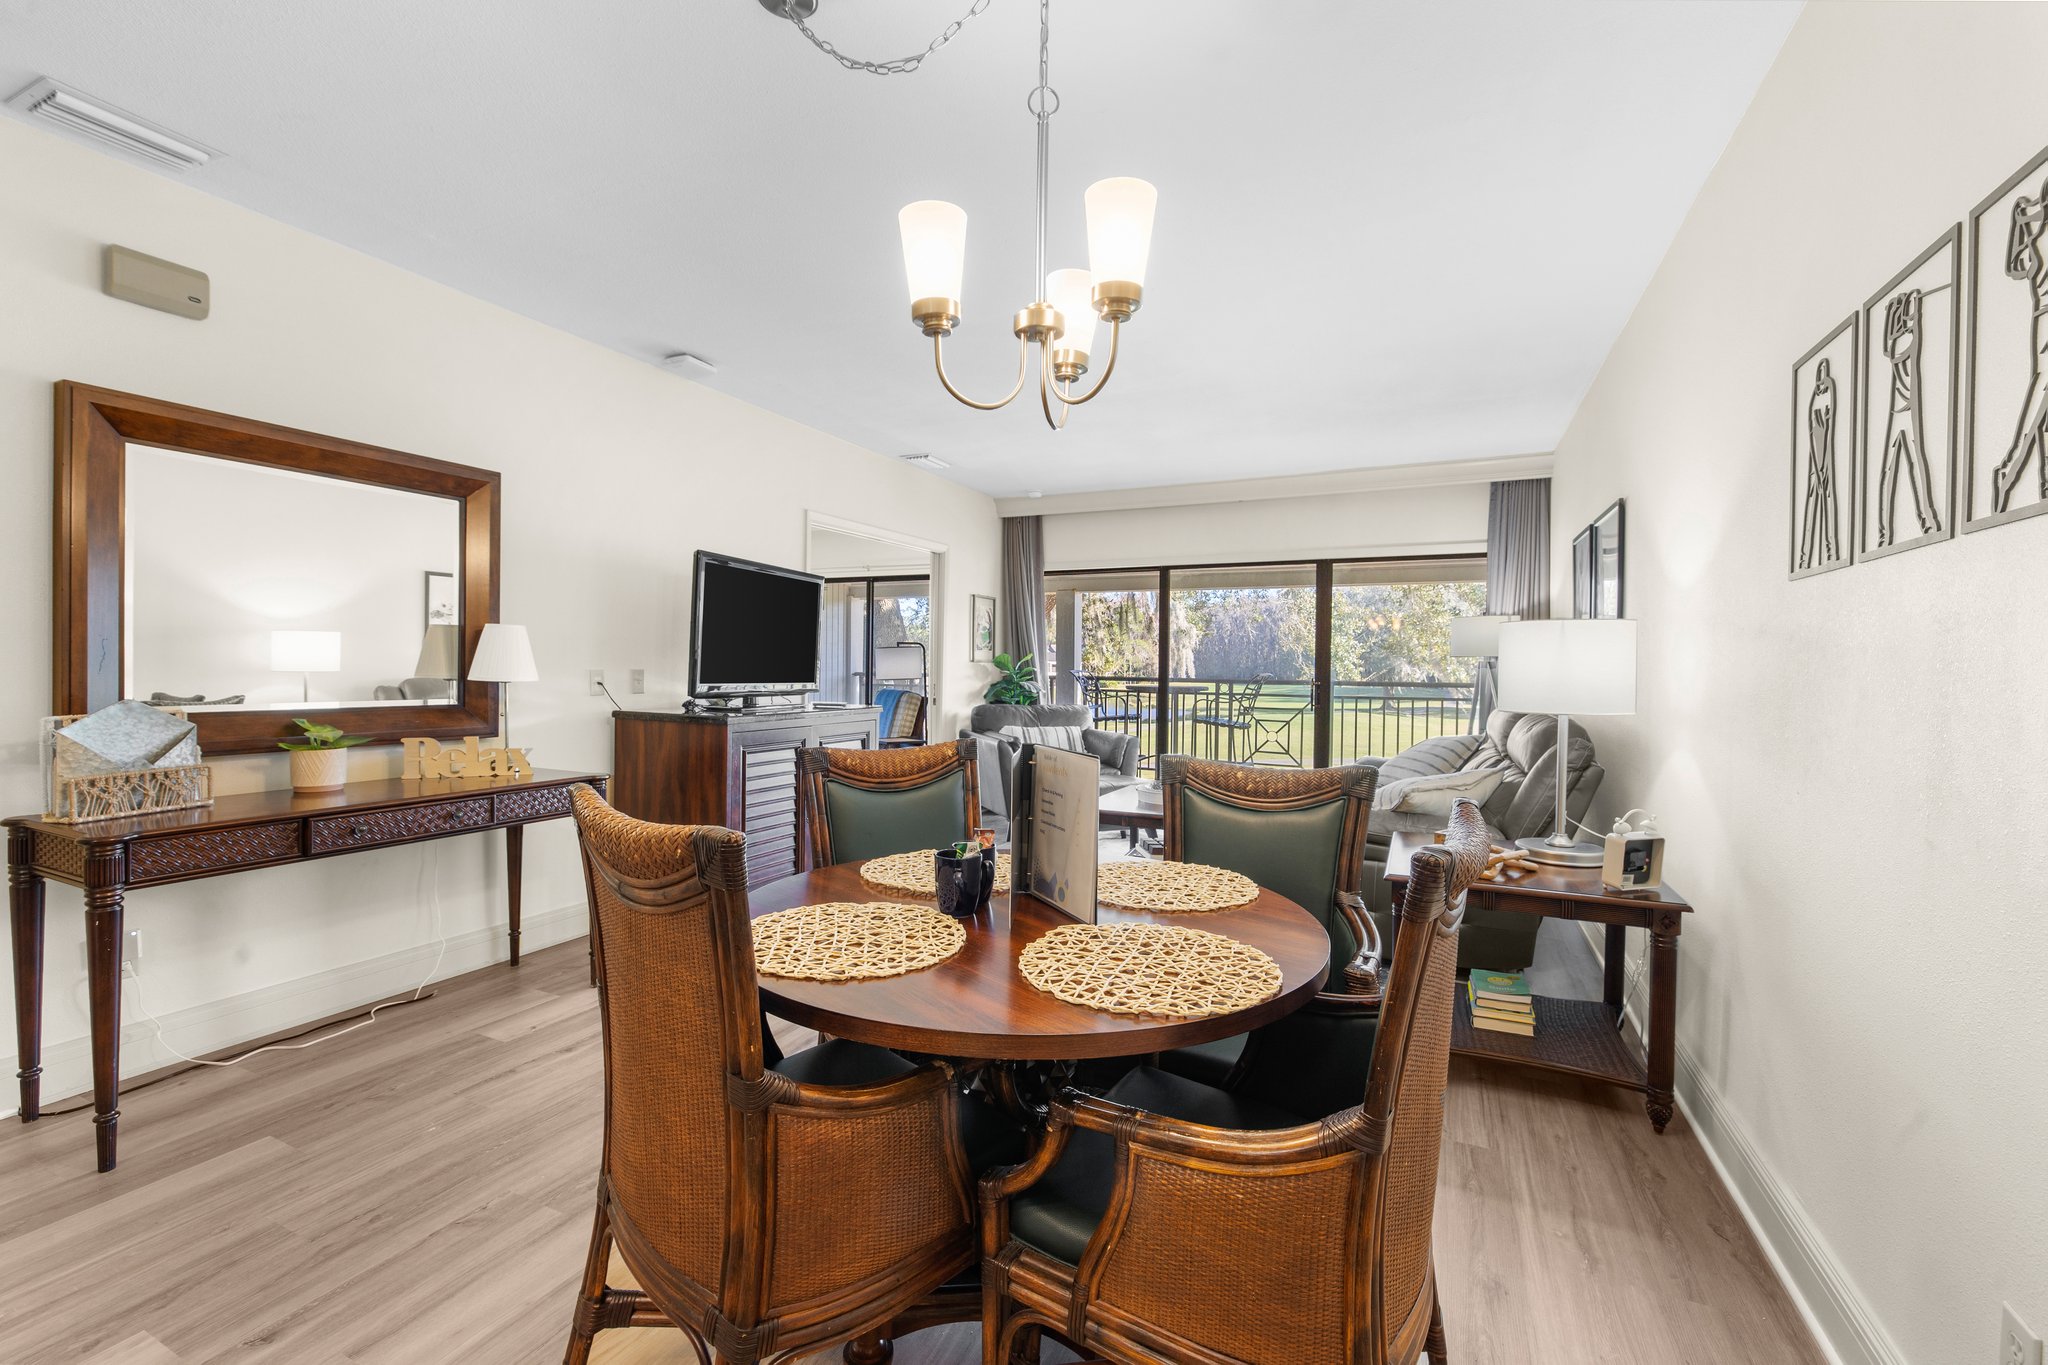 The dining and living space of Rental Properties in the Tampa Bay Area